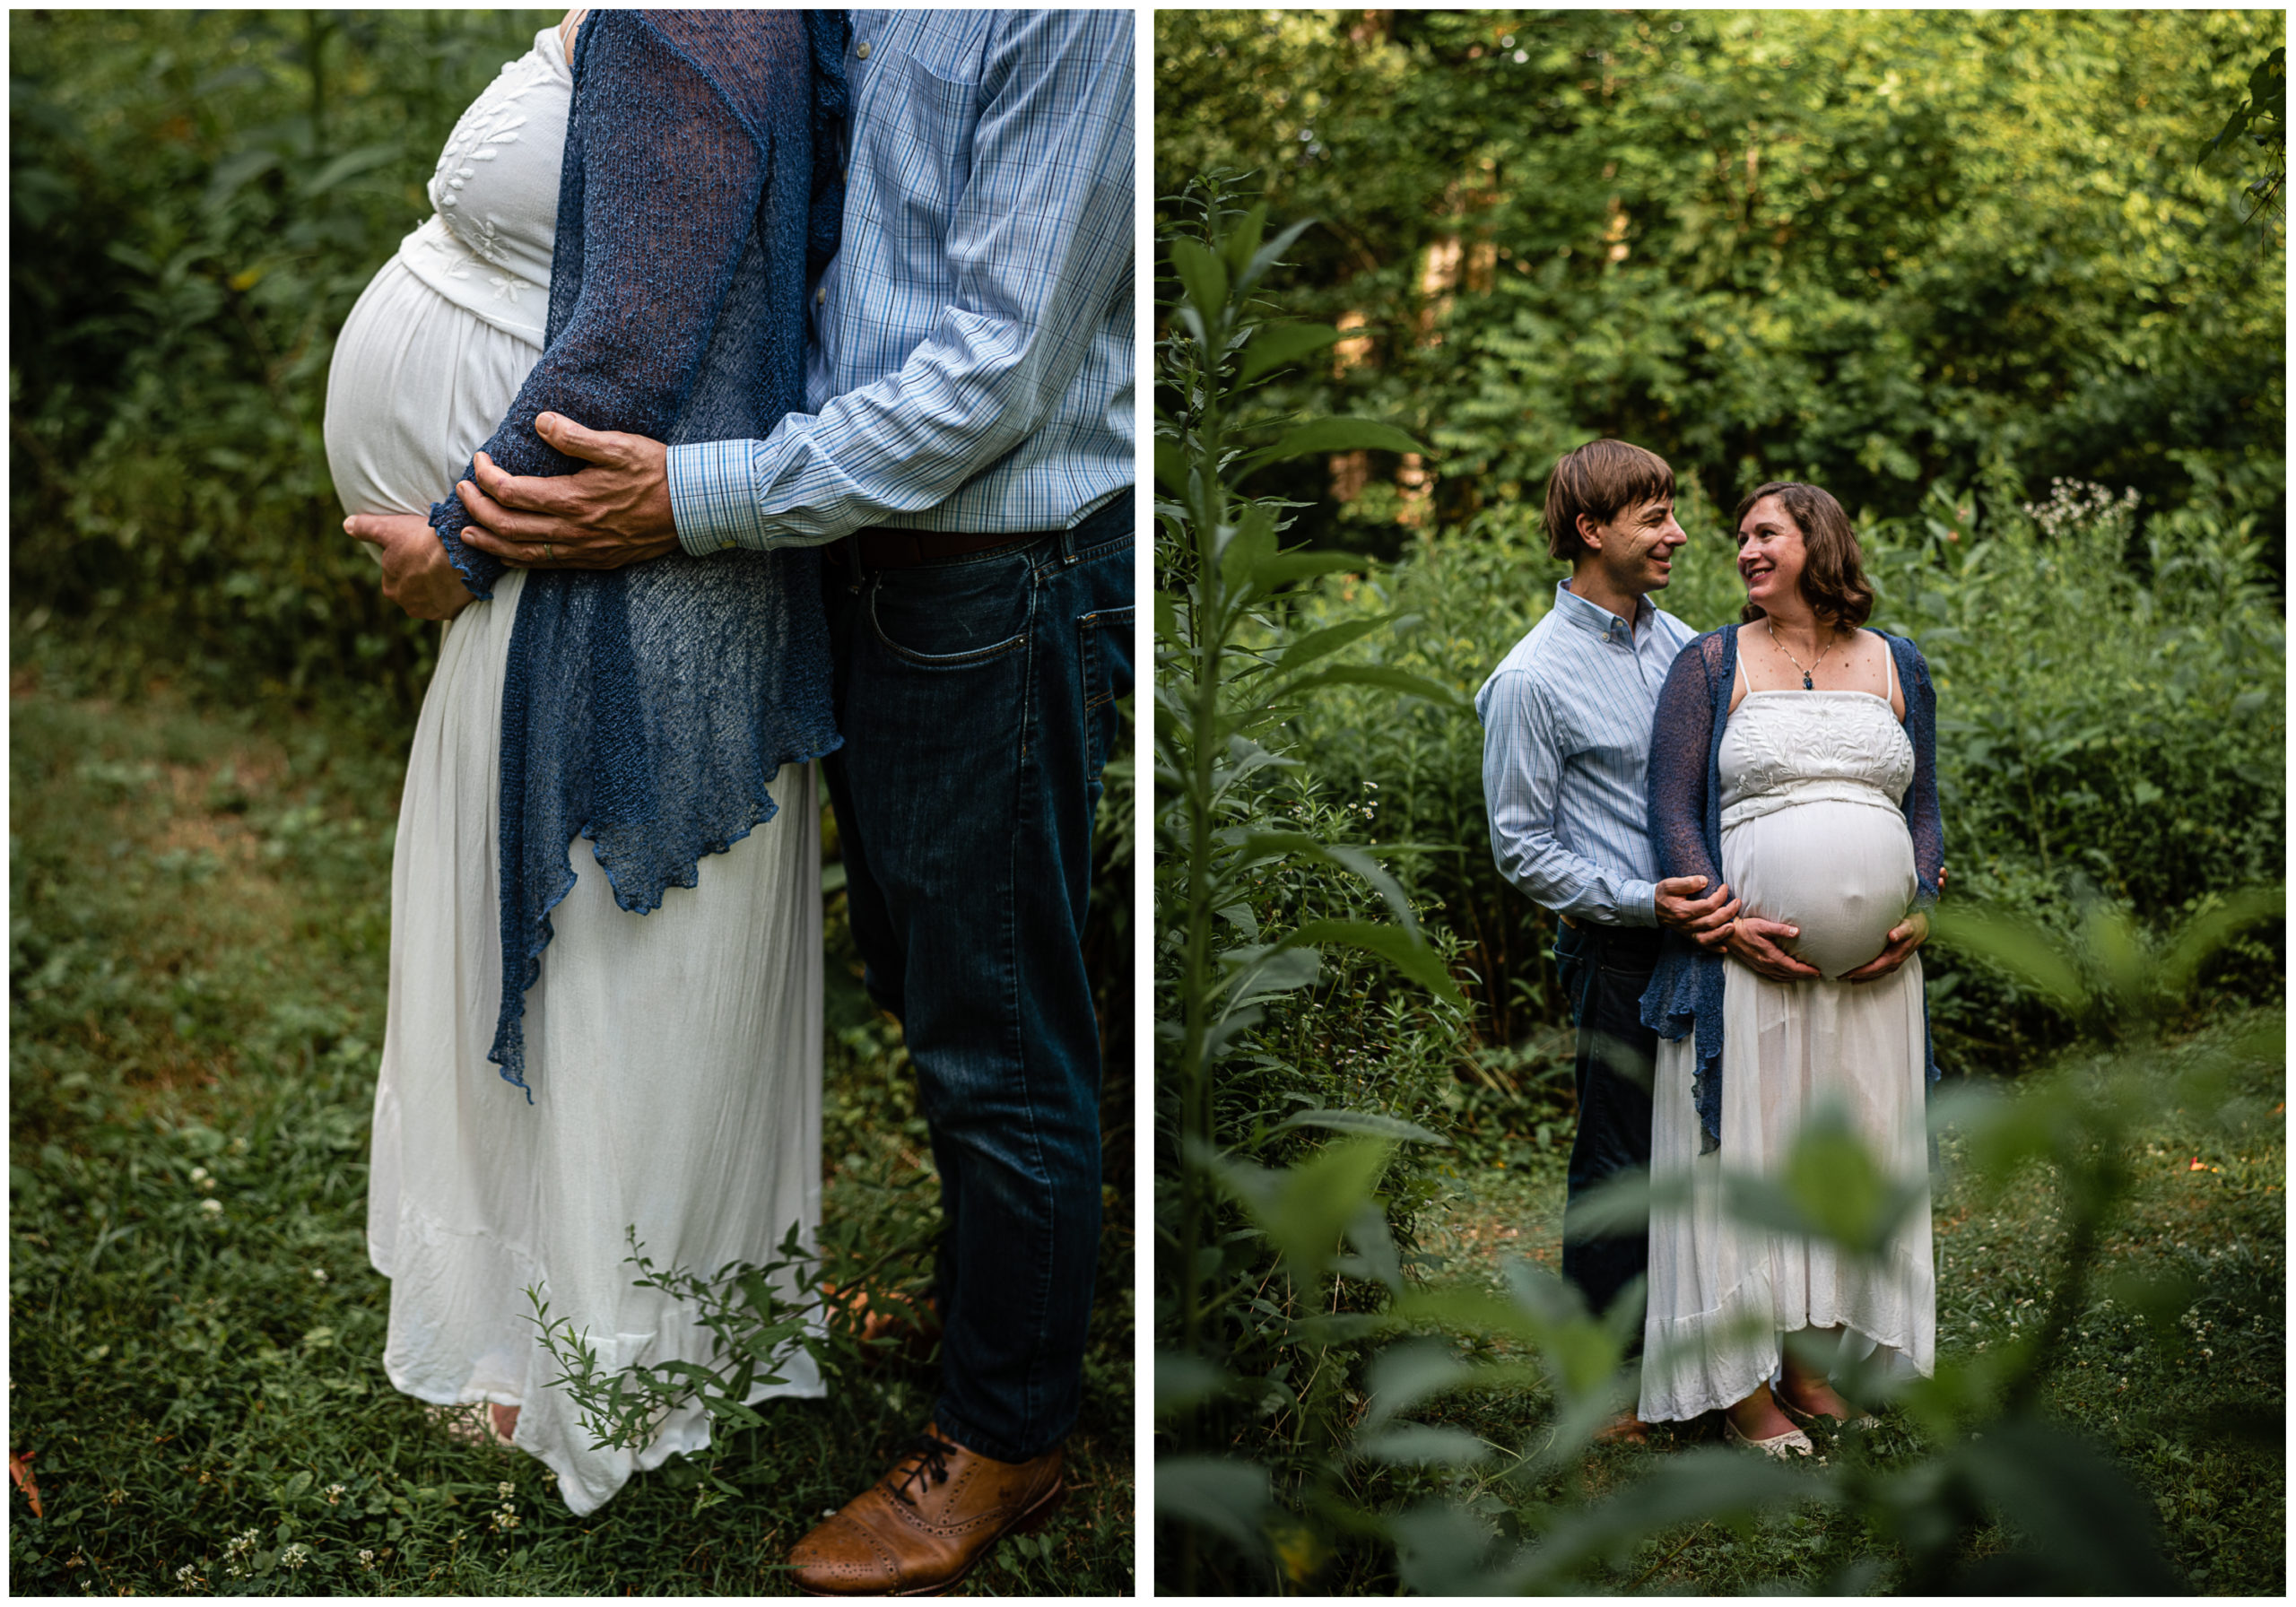 Collage of a couple posing for maternity photos in a lush green field.